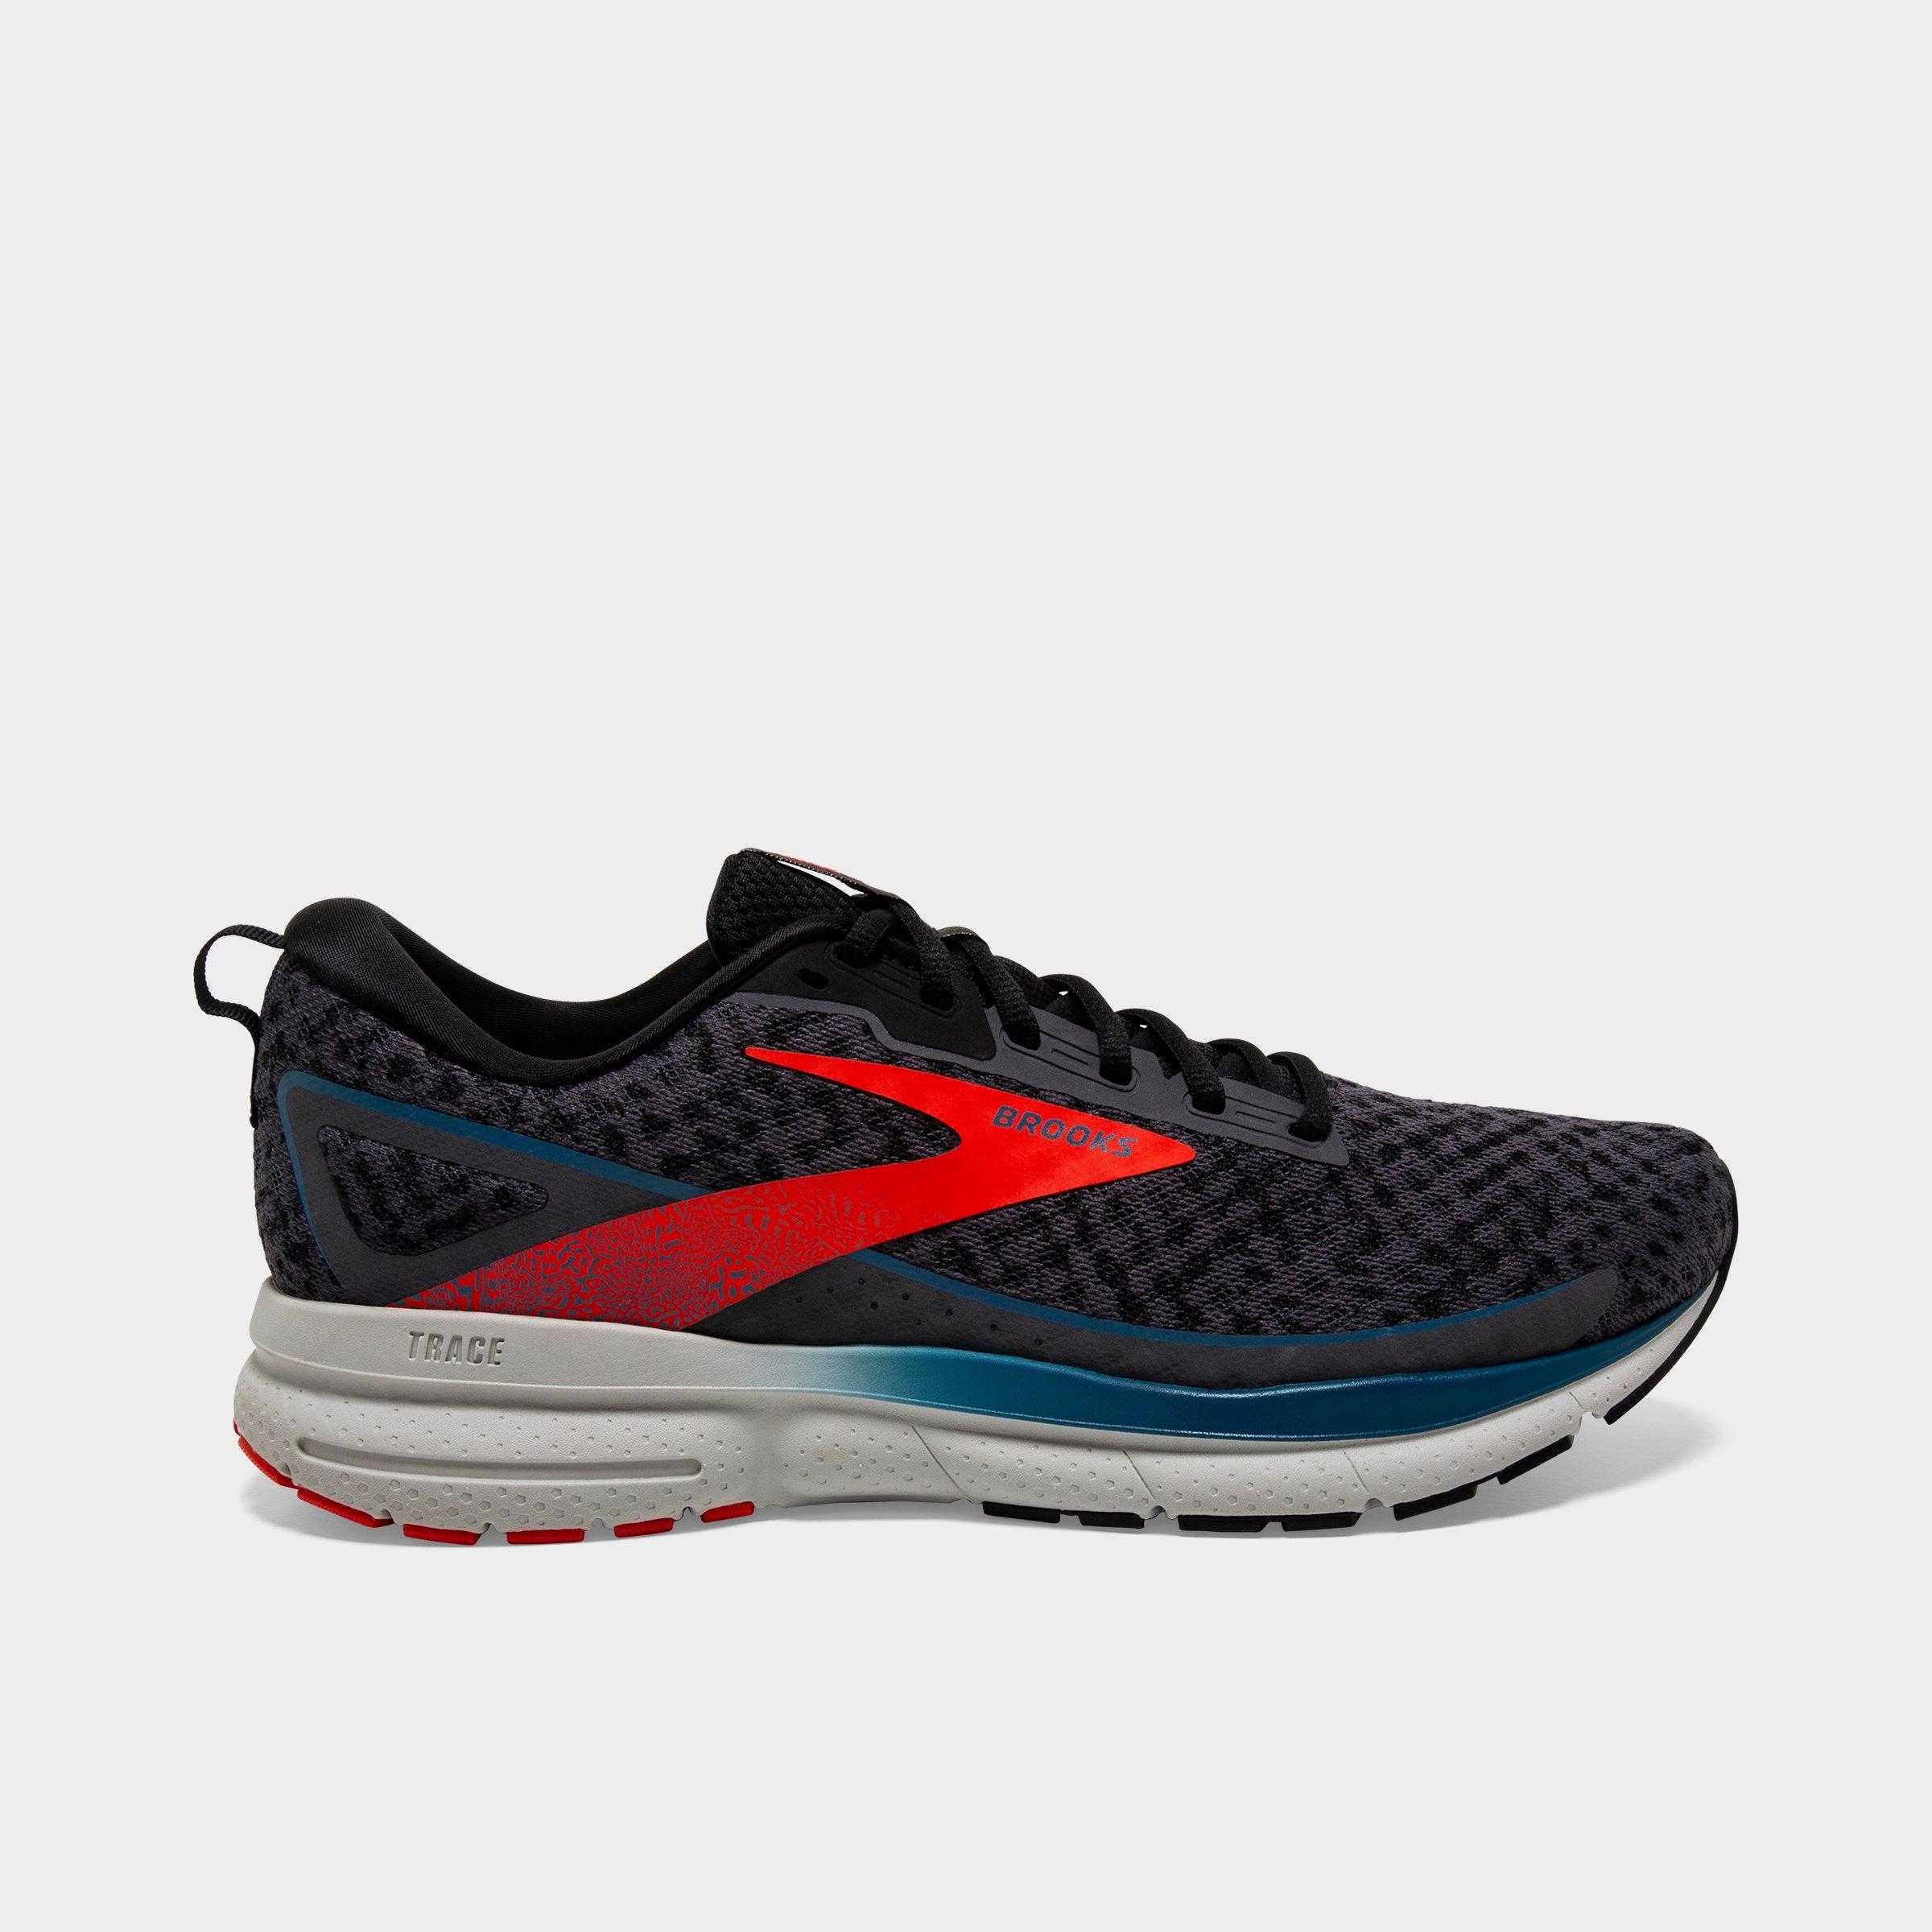 Men's Brooks Trace 3 Running Shoes